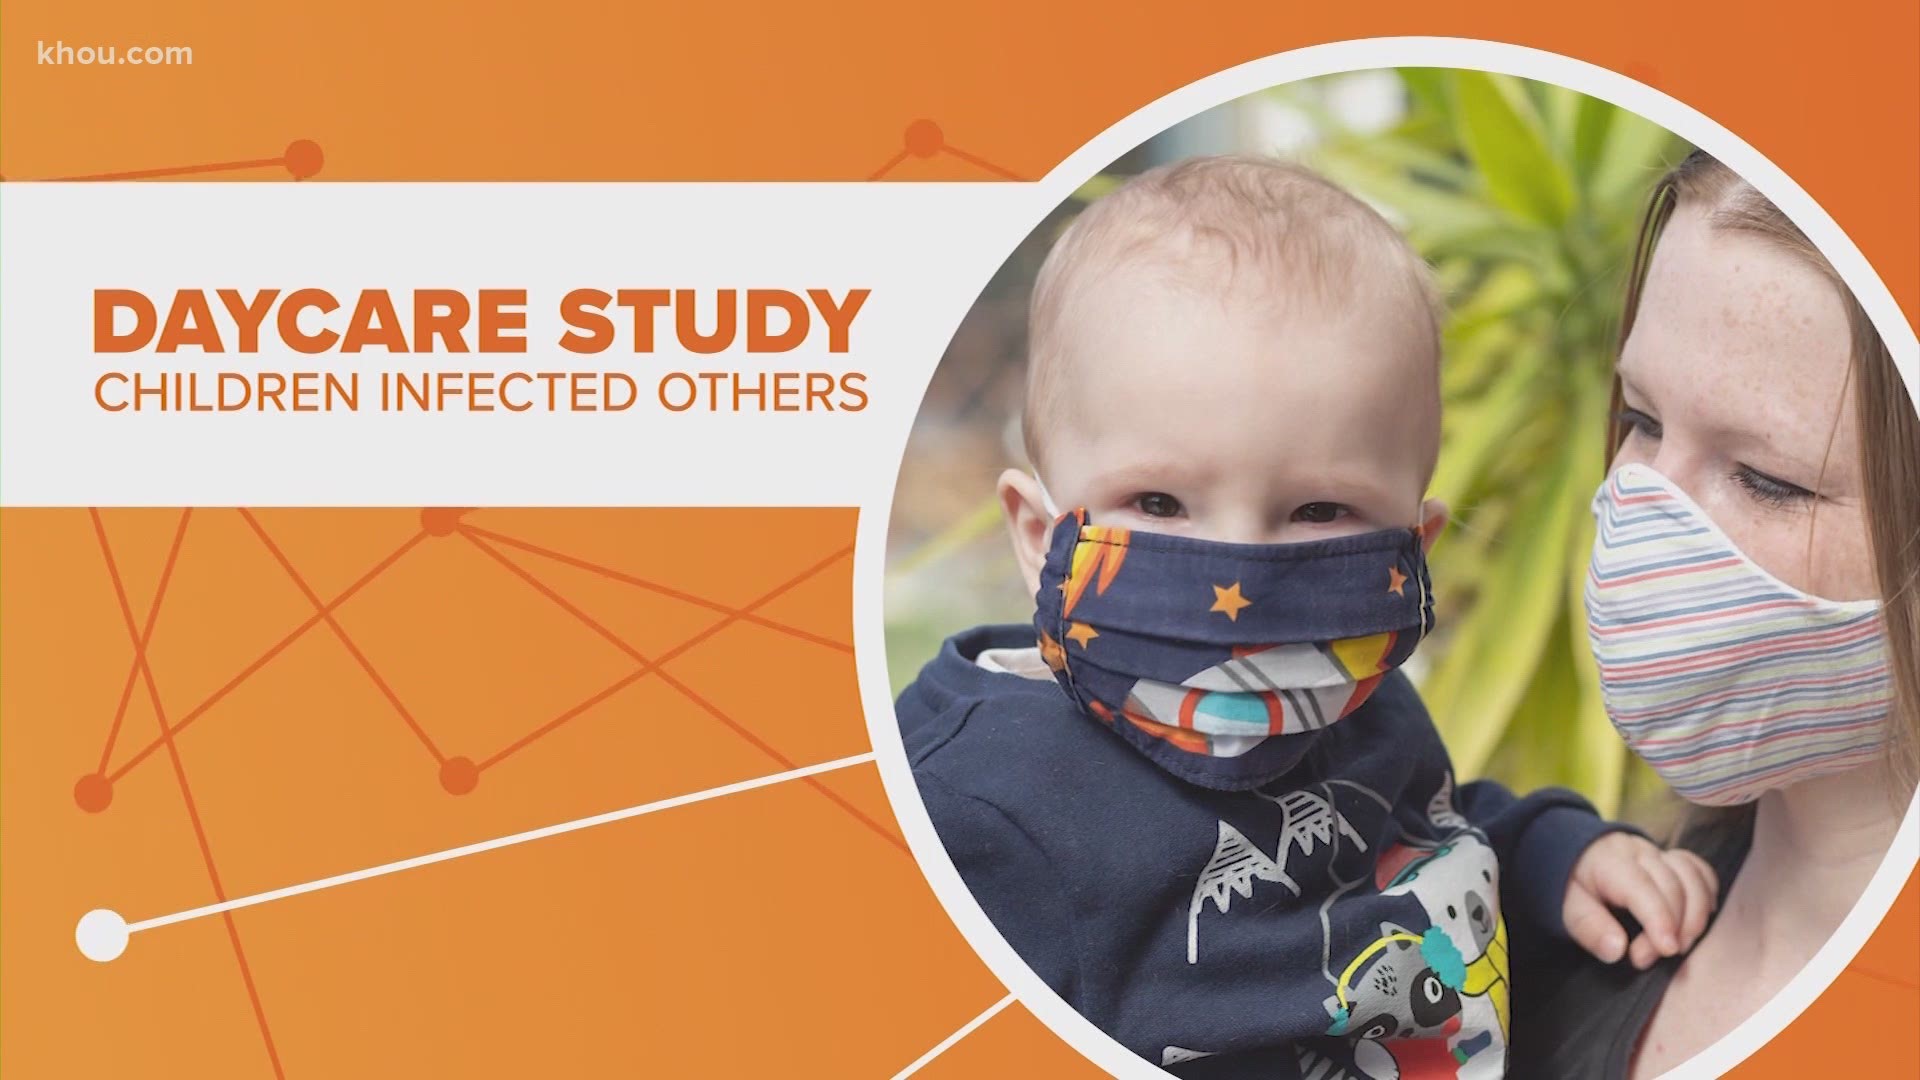 There is new evidence that children can not only get the coronavirus but they can spread it to friends and family as well. Let’s connect the dots.